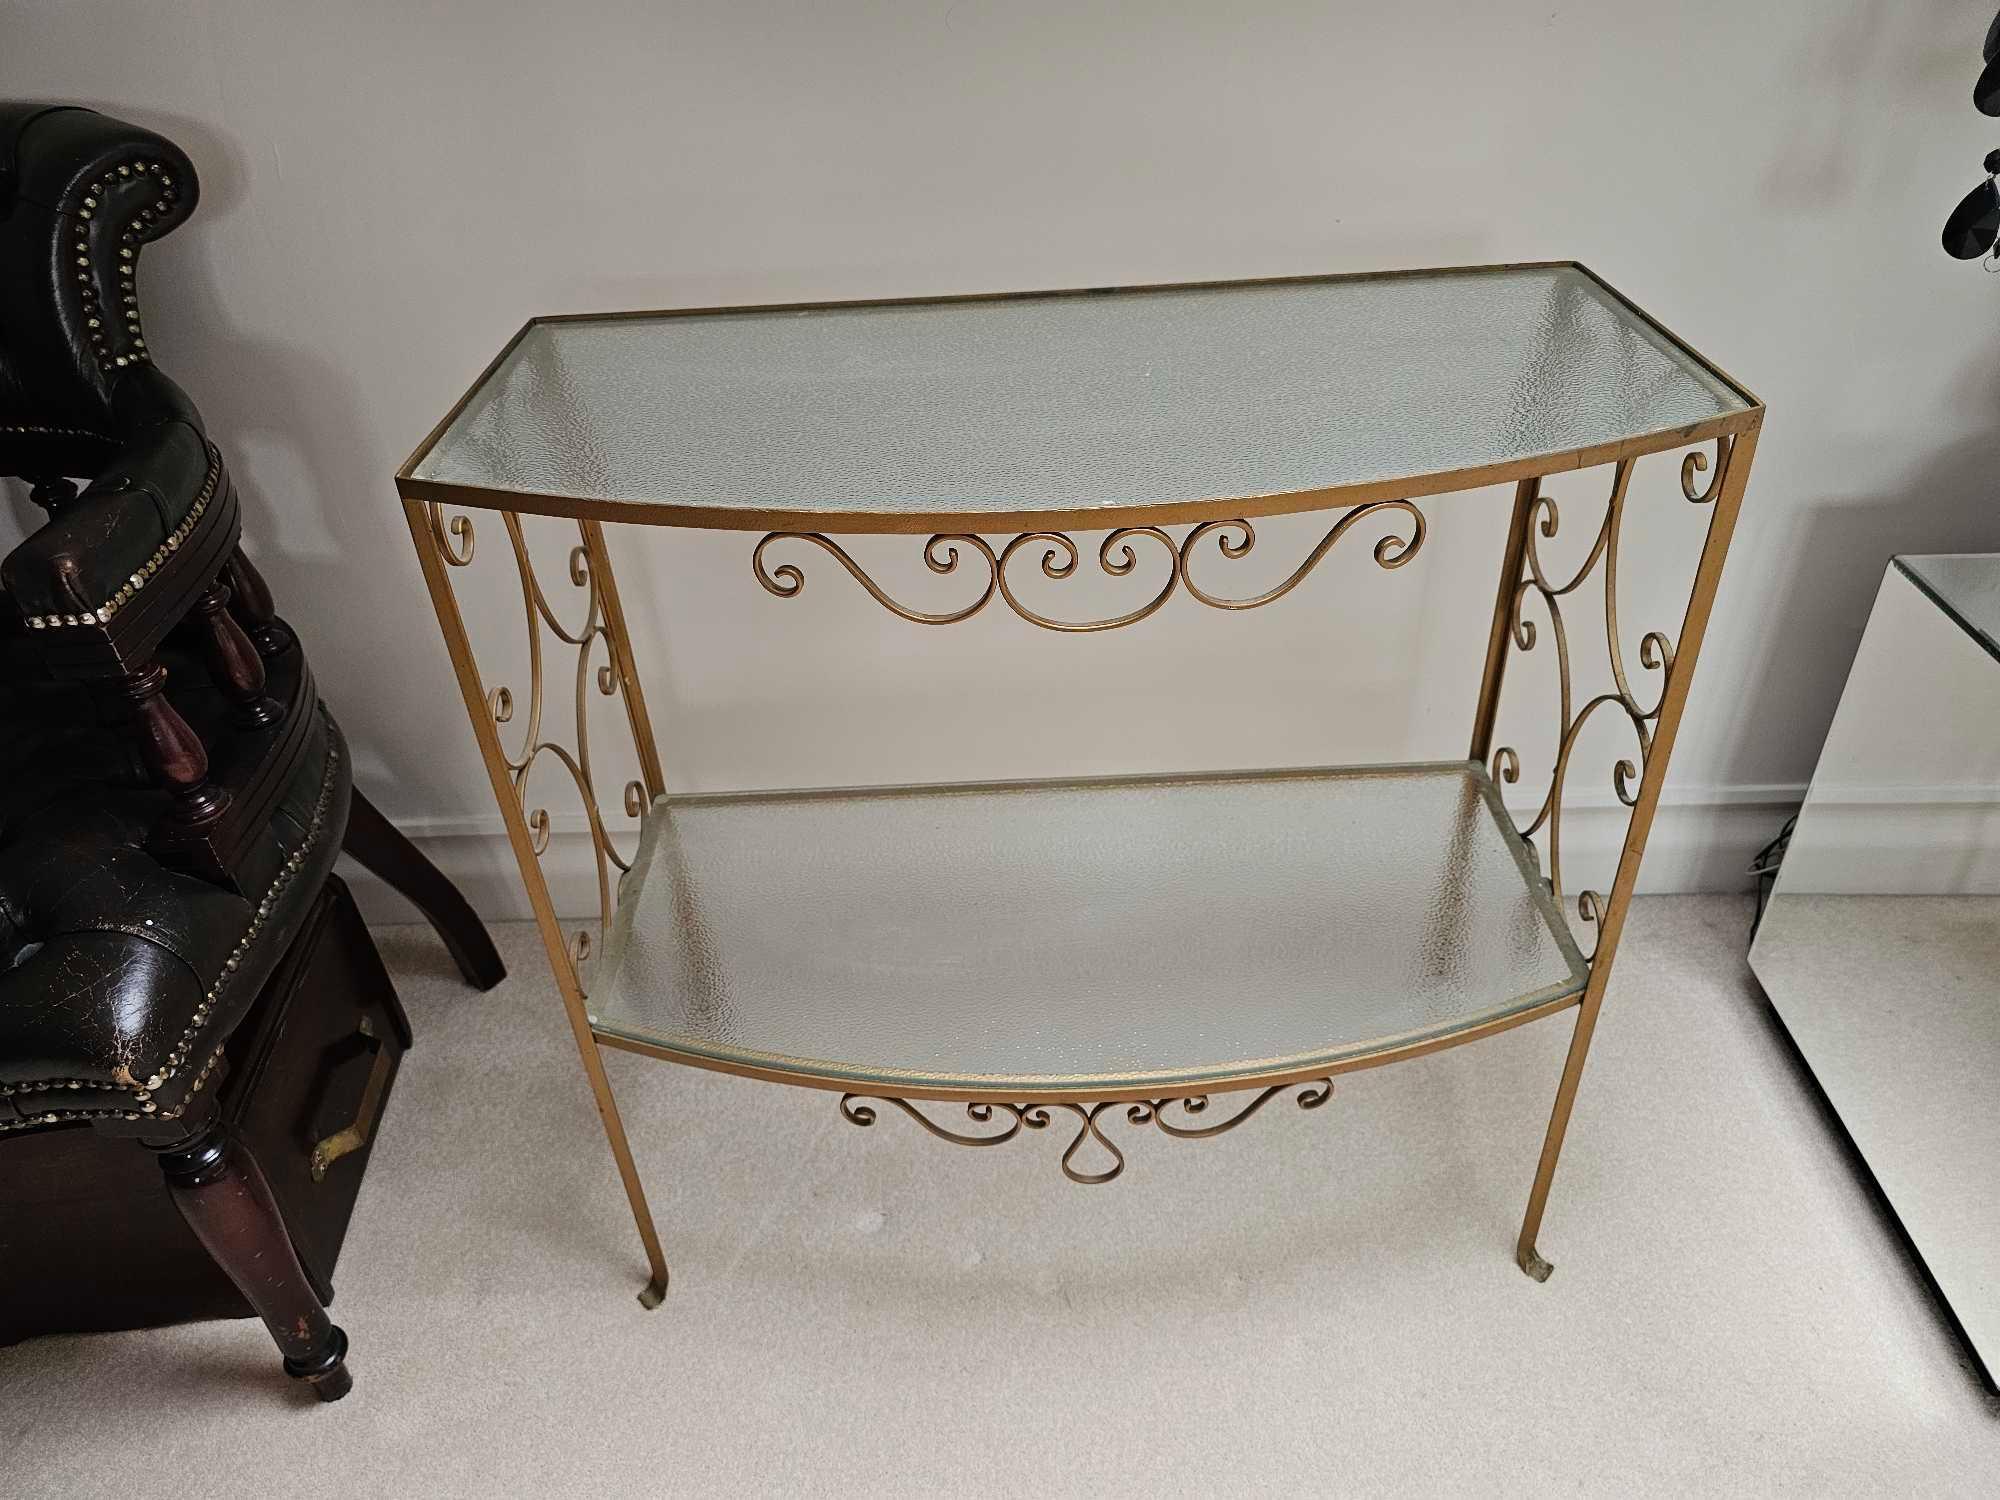 A Cast Metal Scroll Work Painted Console Table With Opaque Glass Top And Under Tier 74 X 36 X 75cm - Image 3 of 4